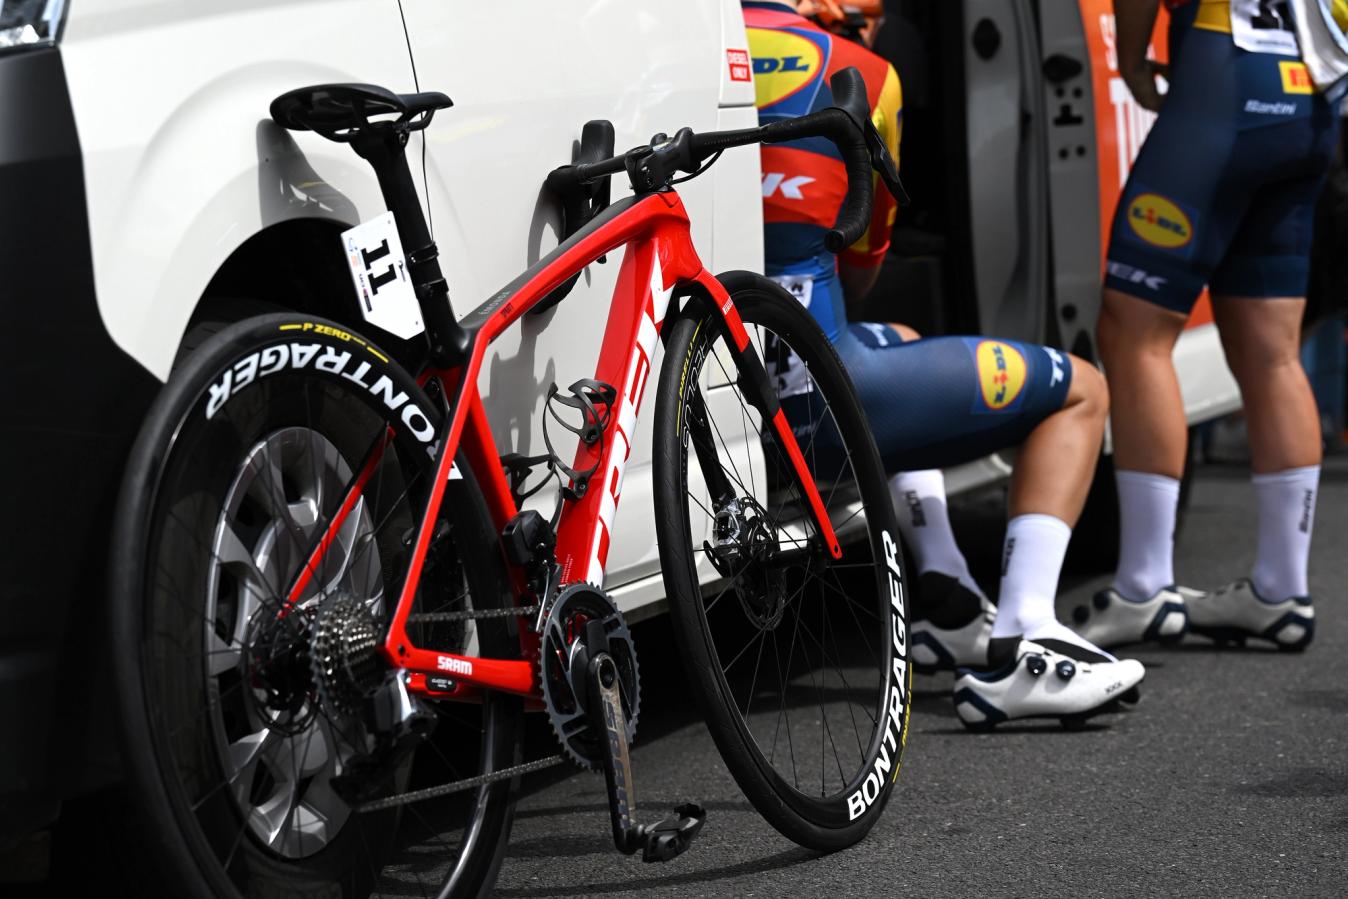 Lidl-Trek riders will choose between the Emonda (pictured) and the Madone